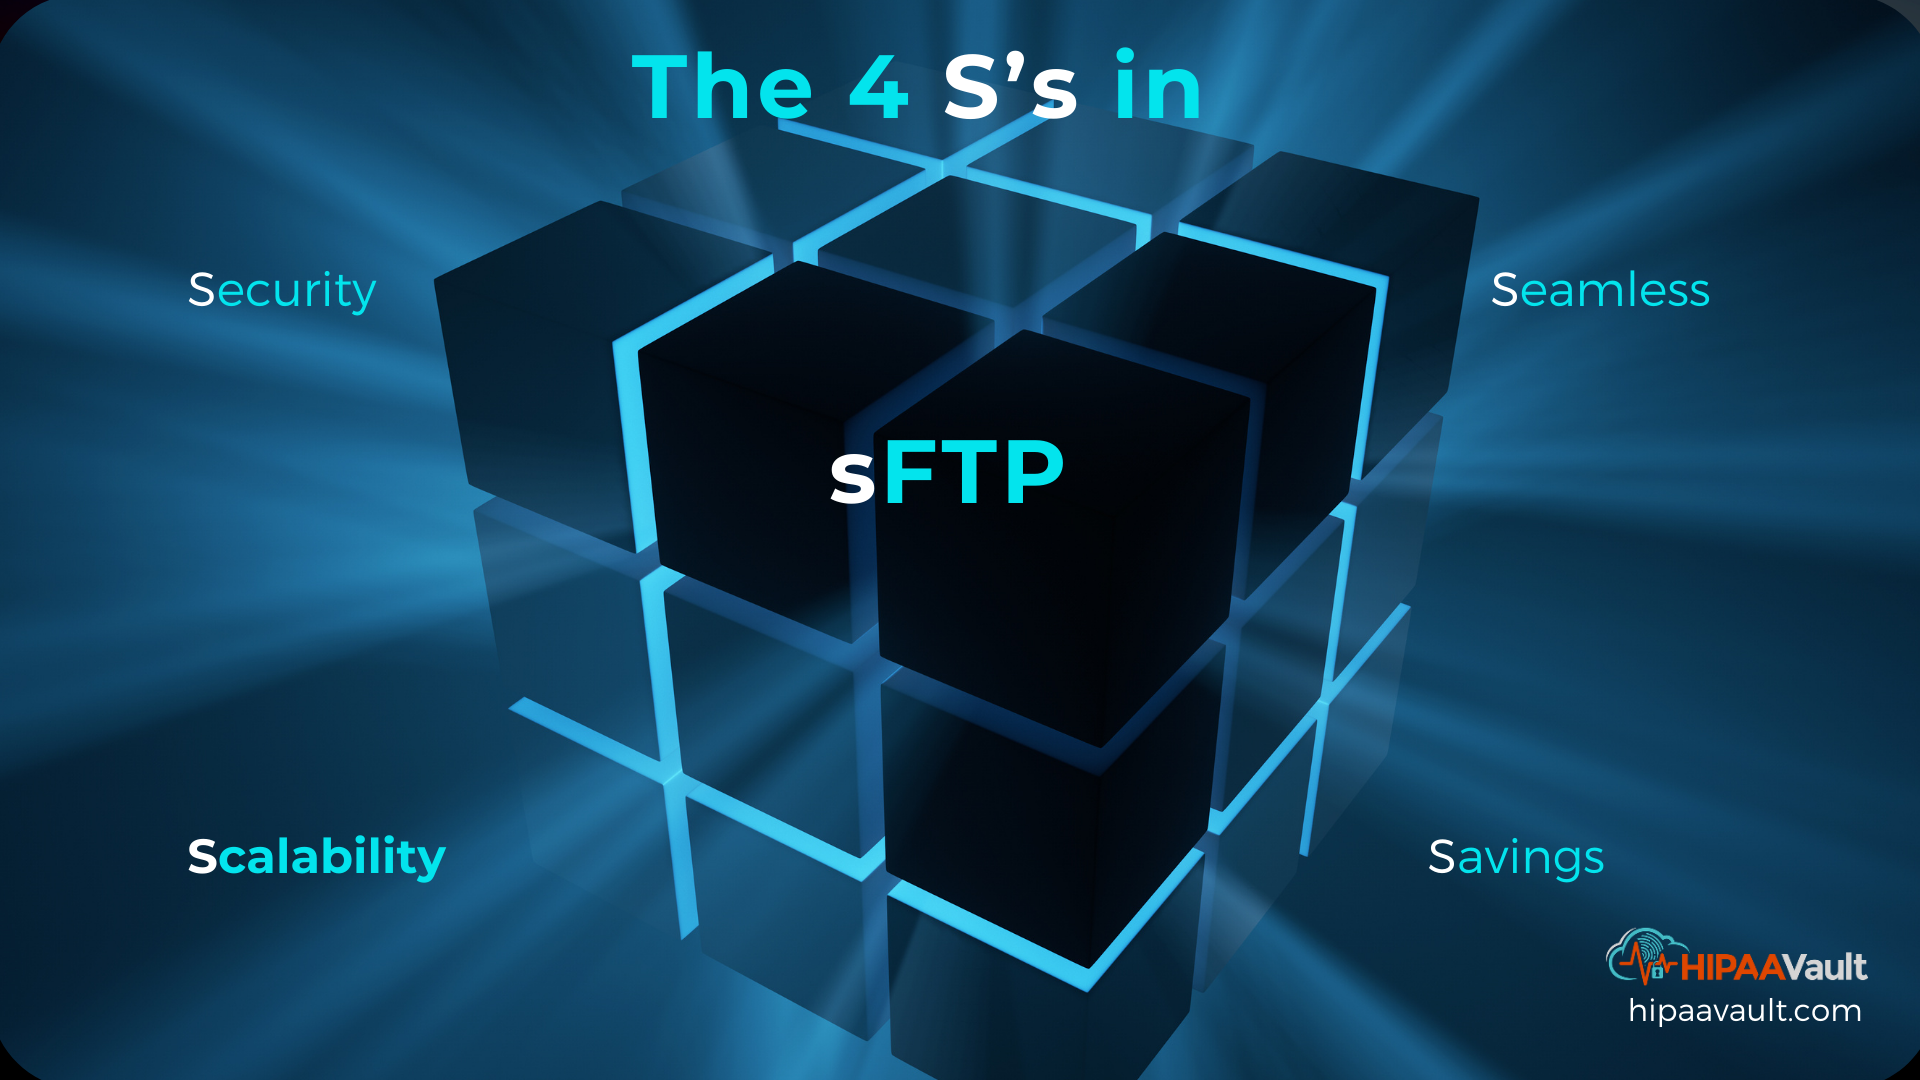 The Benefits of an sFTP Server